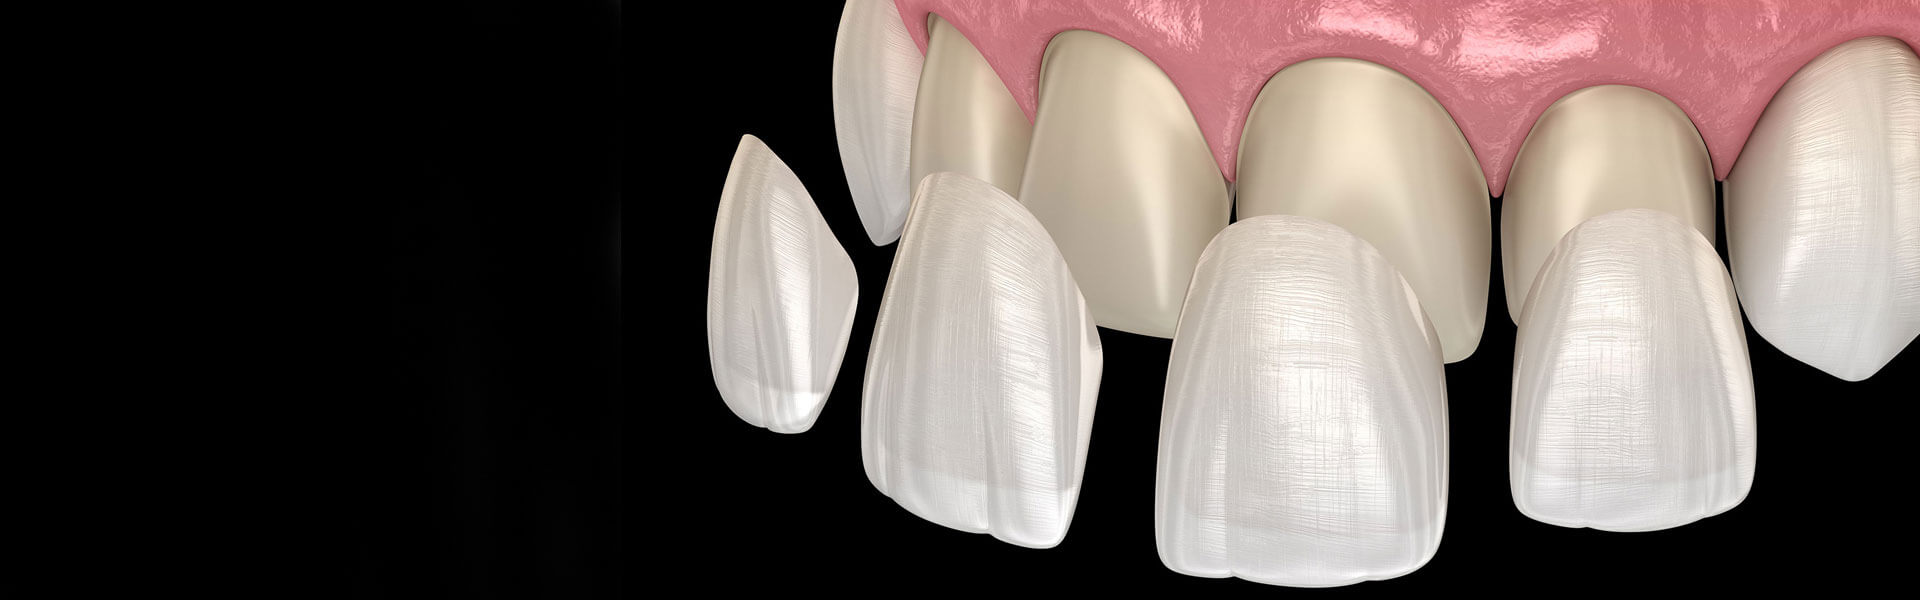 All About Porcelain Veneers